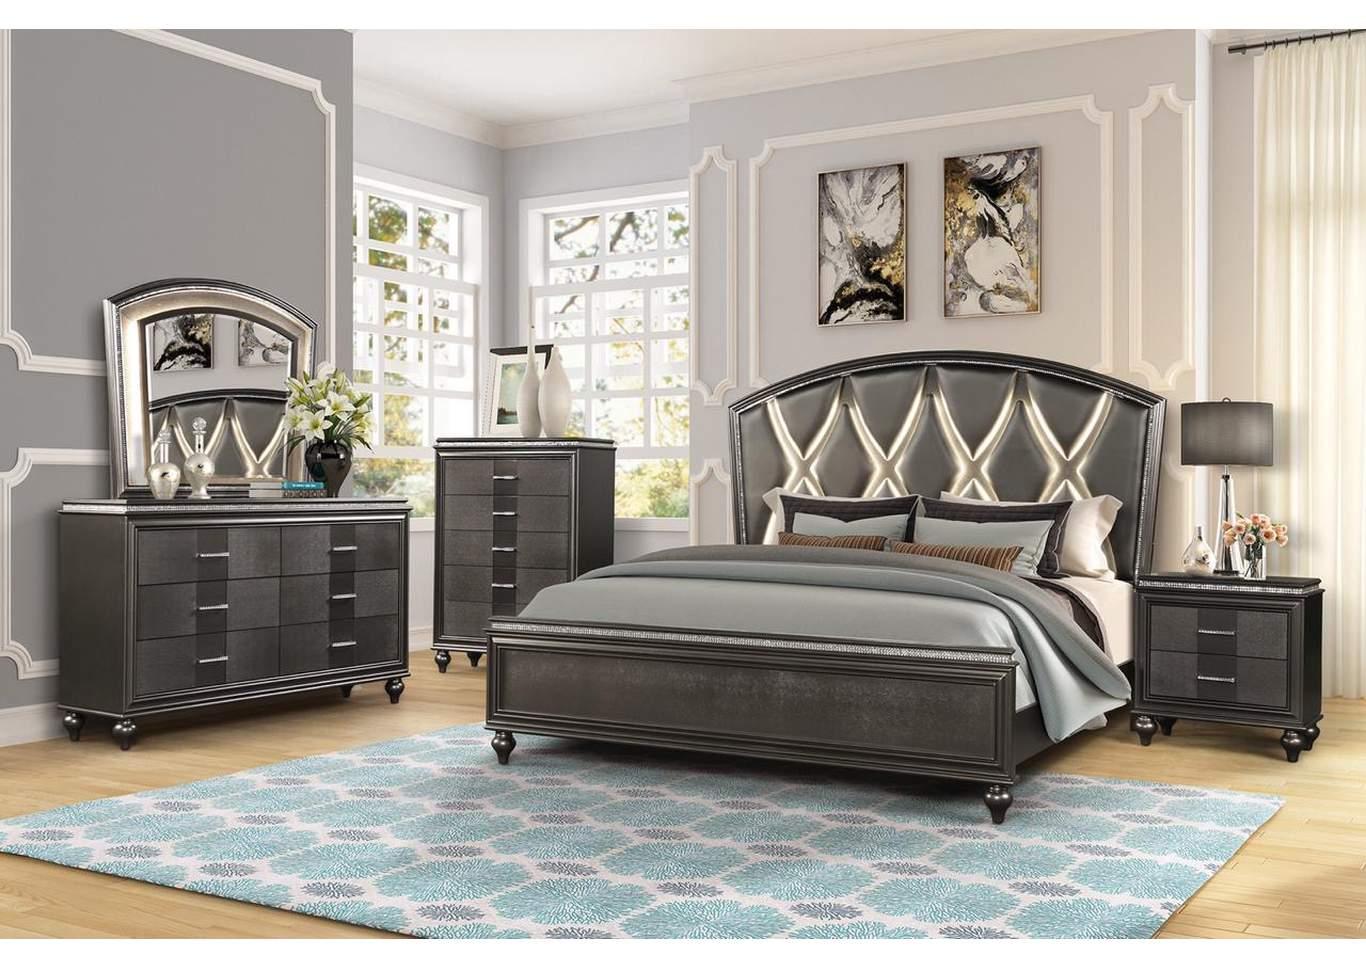 Contemporary, Modern Panel Bedroom Set GINGER GHF-808857684158 in Gunmetal Eco Leather